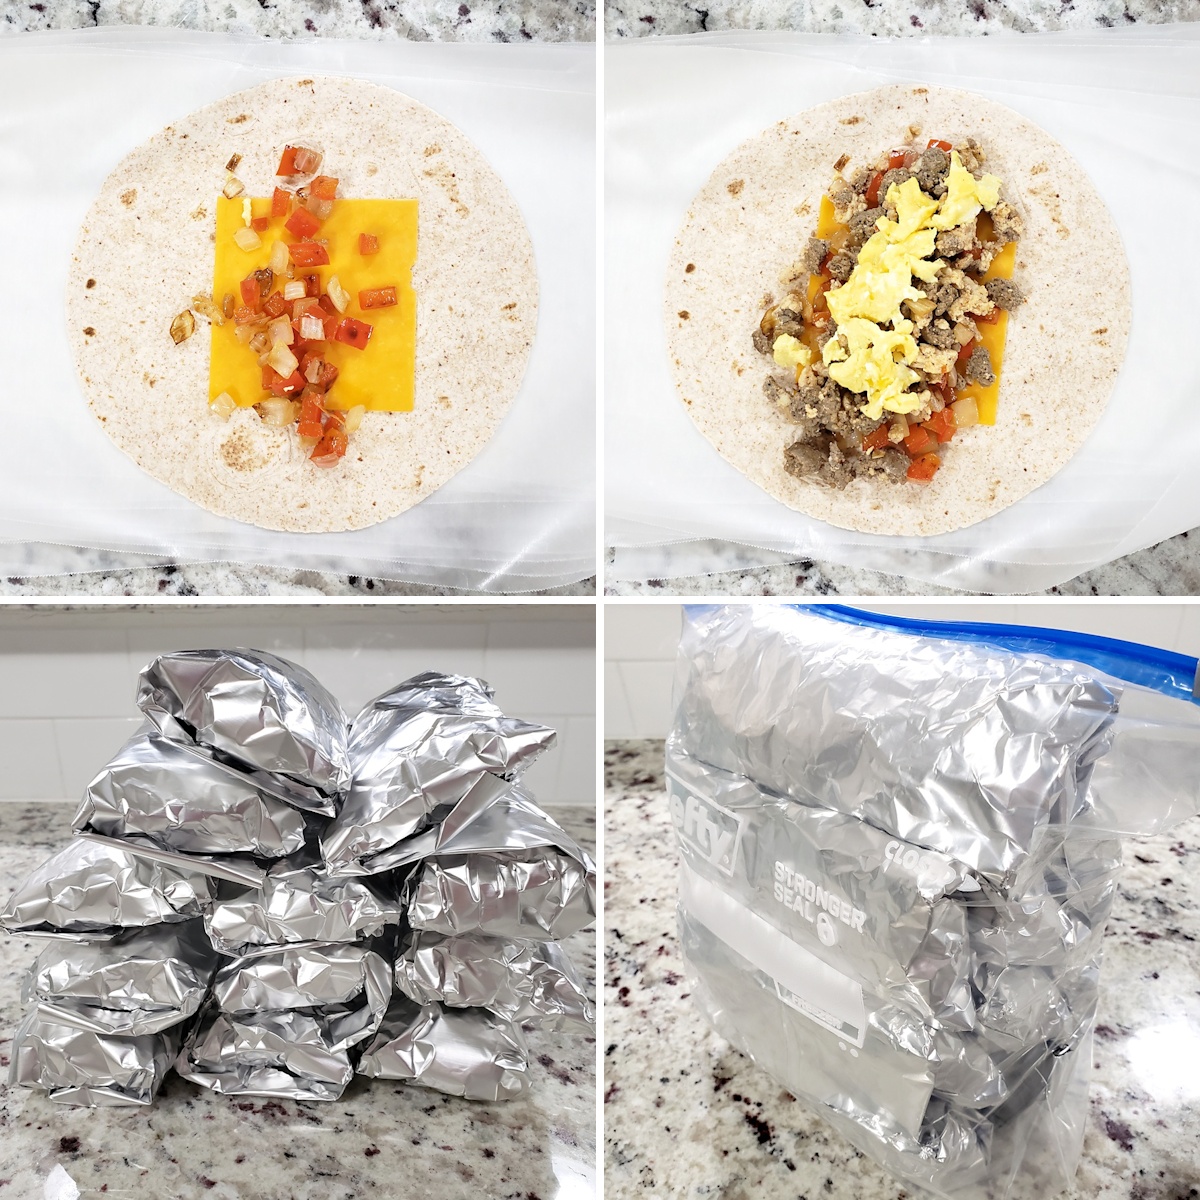 Assembling burritos and wrapping them in foil to freeze.